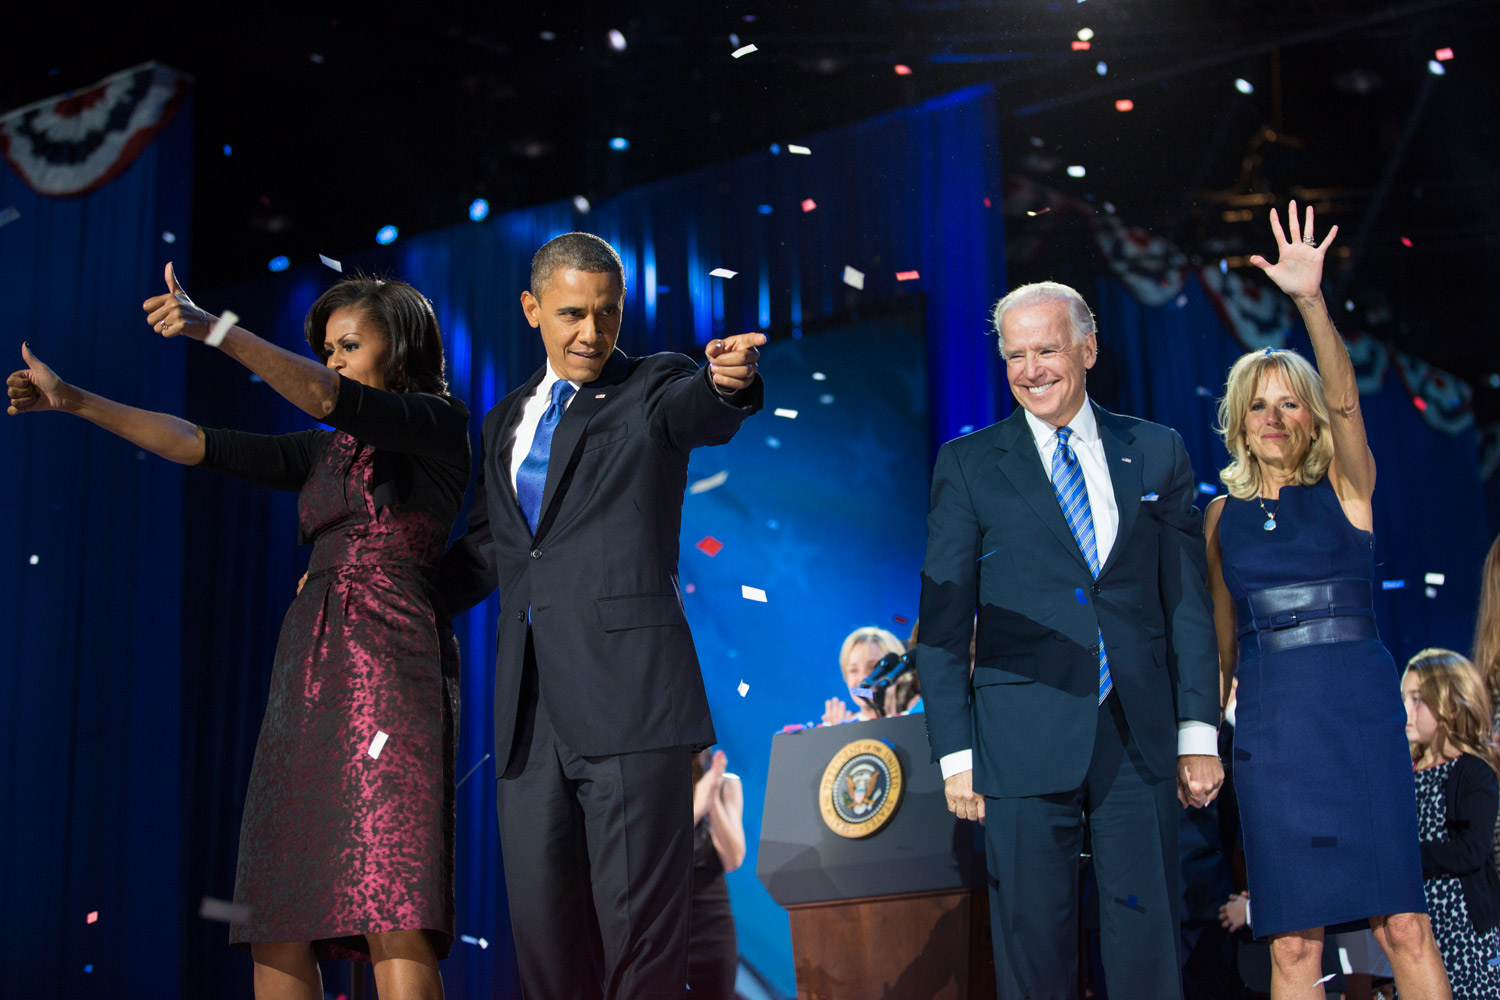 Image: Nov. 6, 2012. First Lady Michelle Obama, President Barack Obama, Vice President Joe Biden and Jill Biden at the President's election night victory party in Chicago.